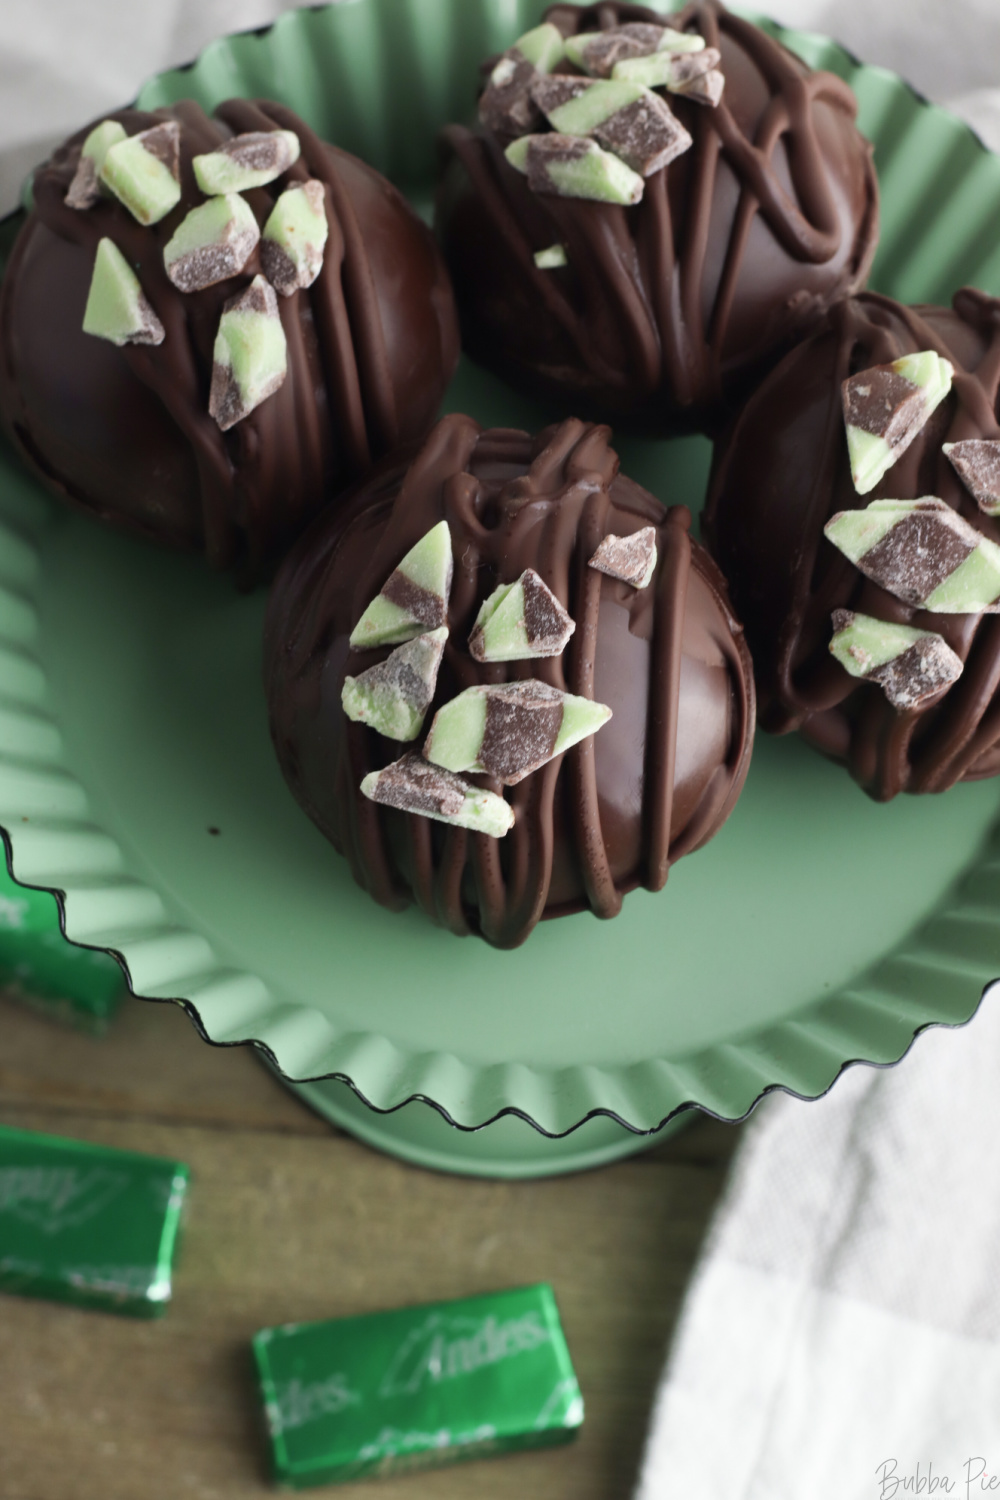 Mint Hot Chocolate Bombs being served on a plate